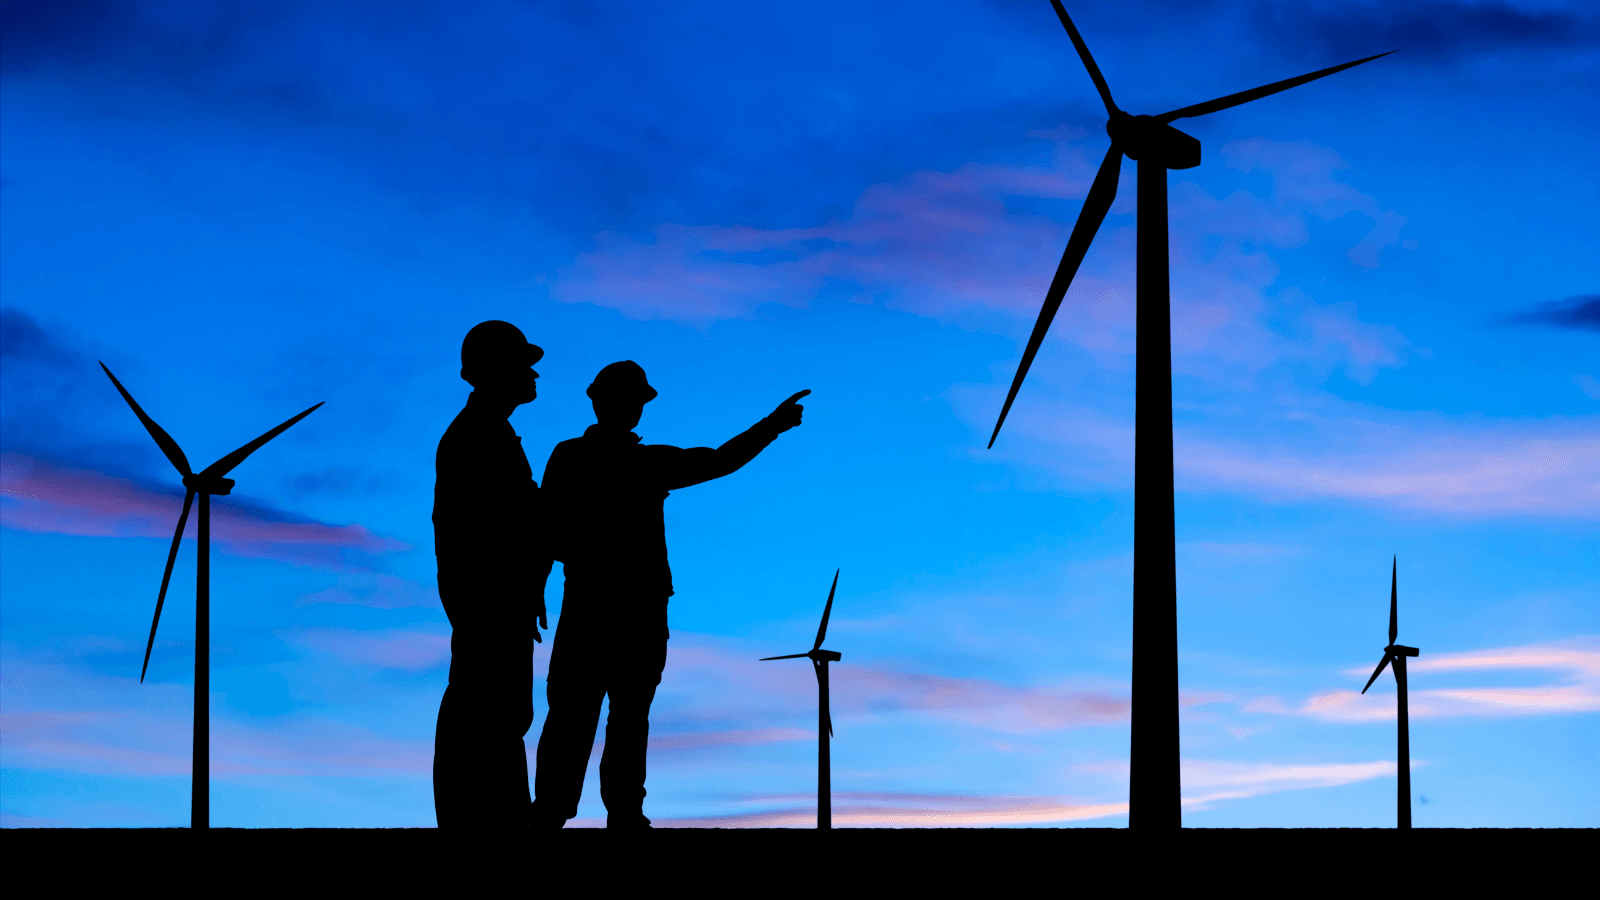 Two workers outlined in front of wind turbines